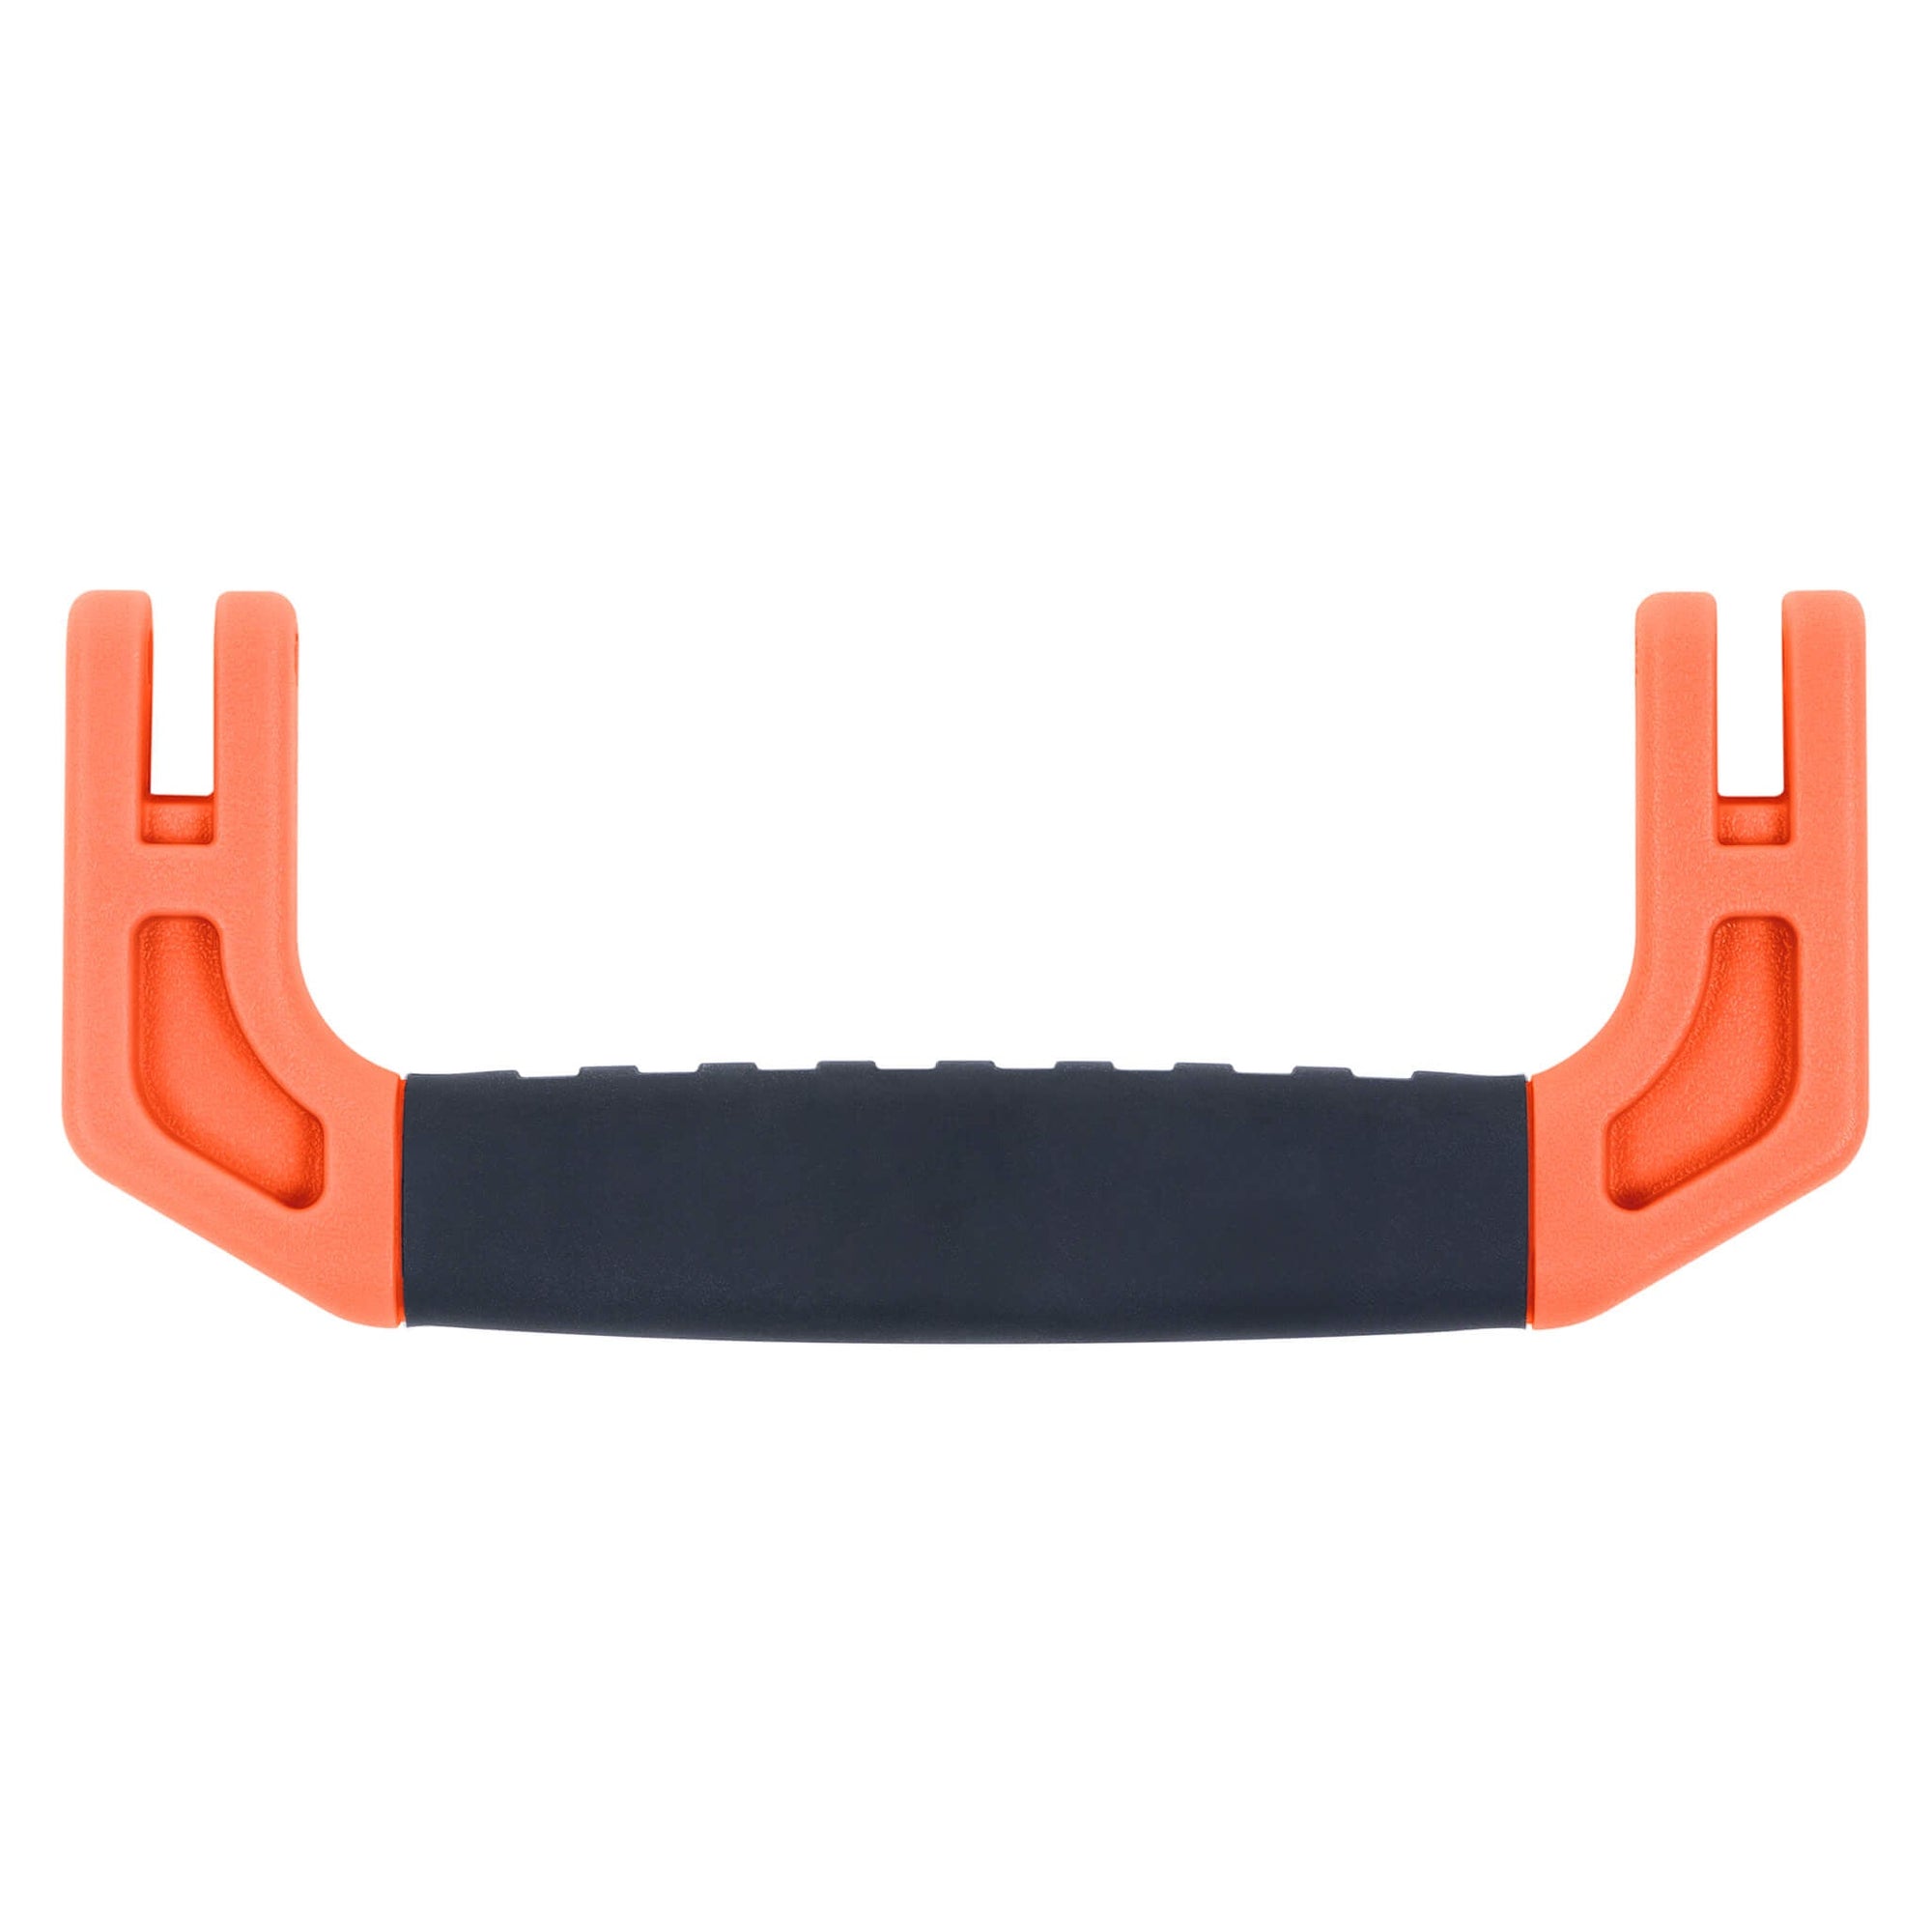 Pelican 1535 Air Rubber Overmolded Replacement Top Handle, Orange ColorCase 